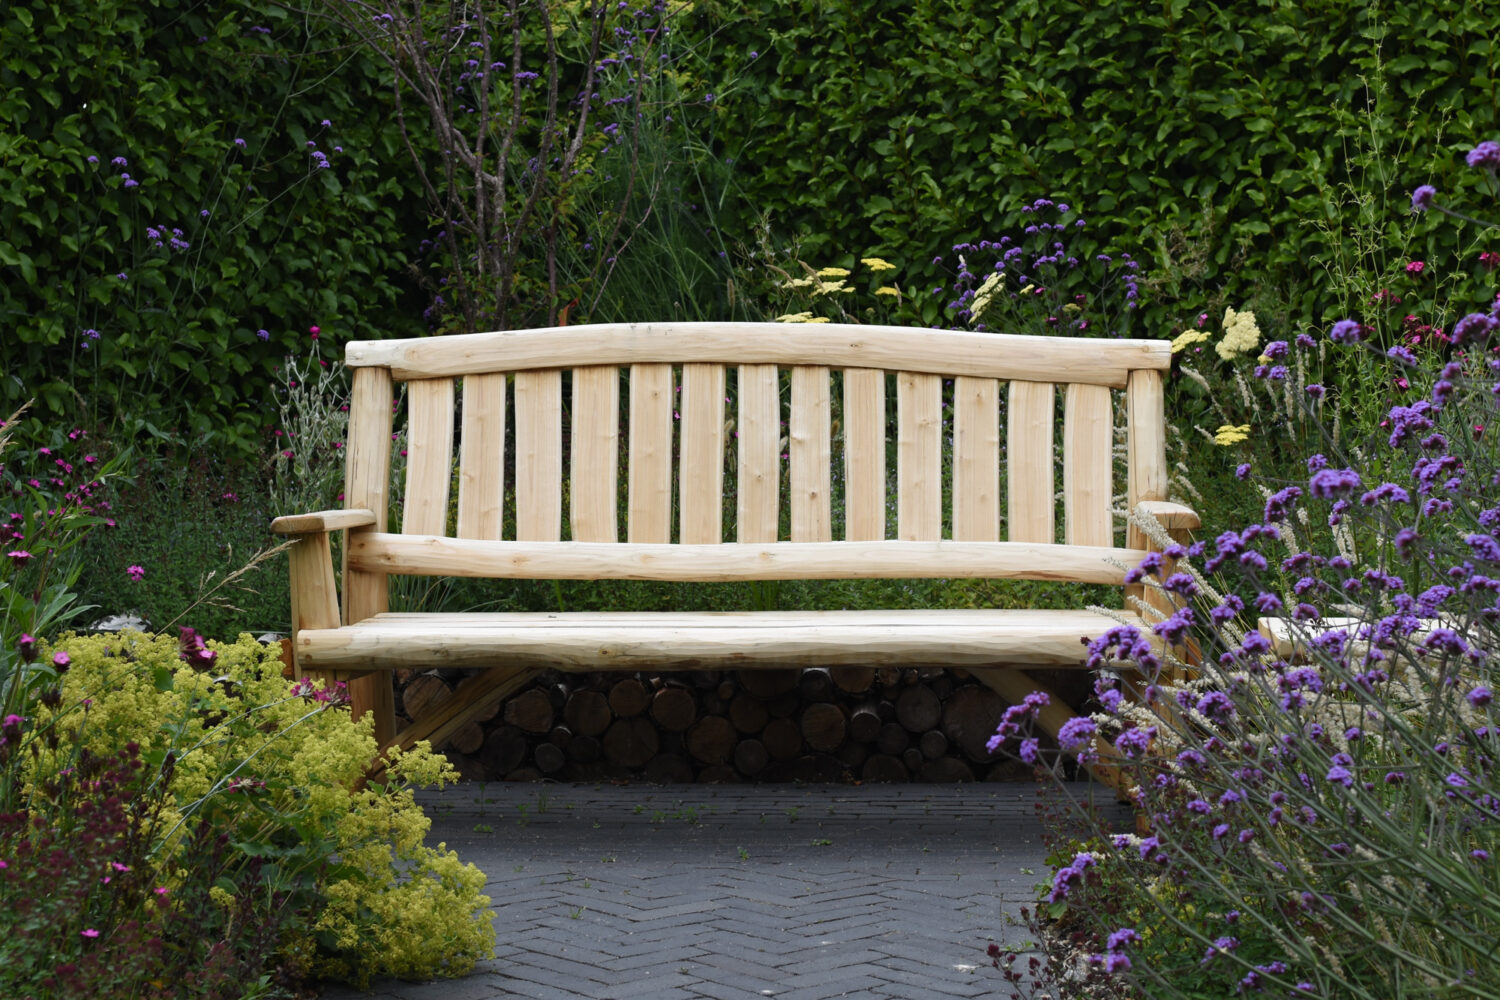 Handcrafted Chestnut Wood Bench at the end of a clay paver path nestled among naturalistic planting